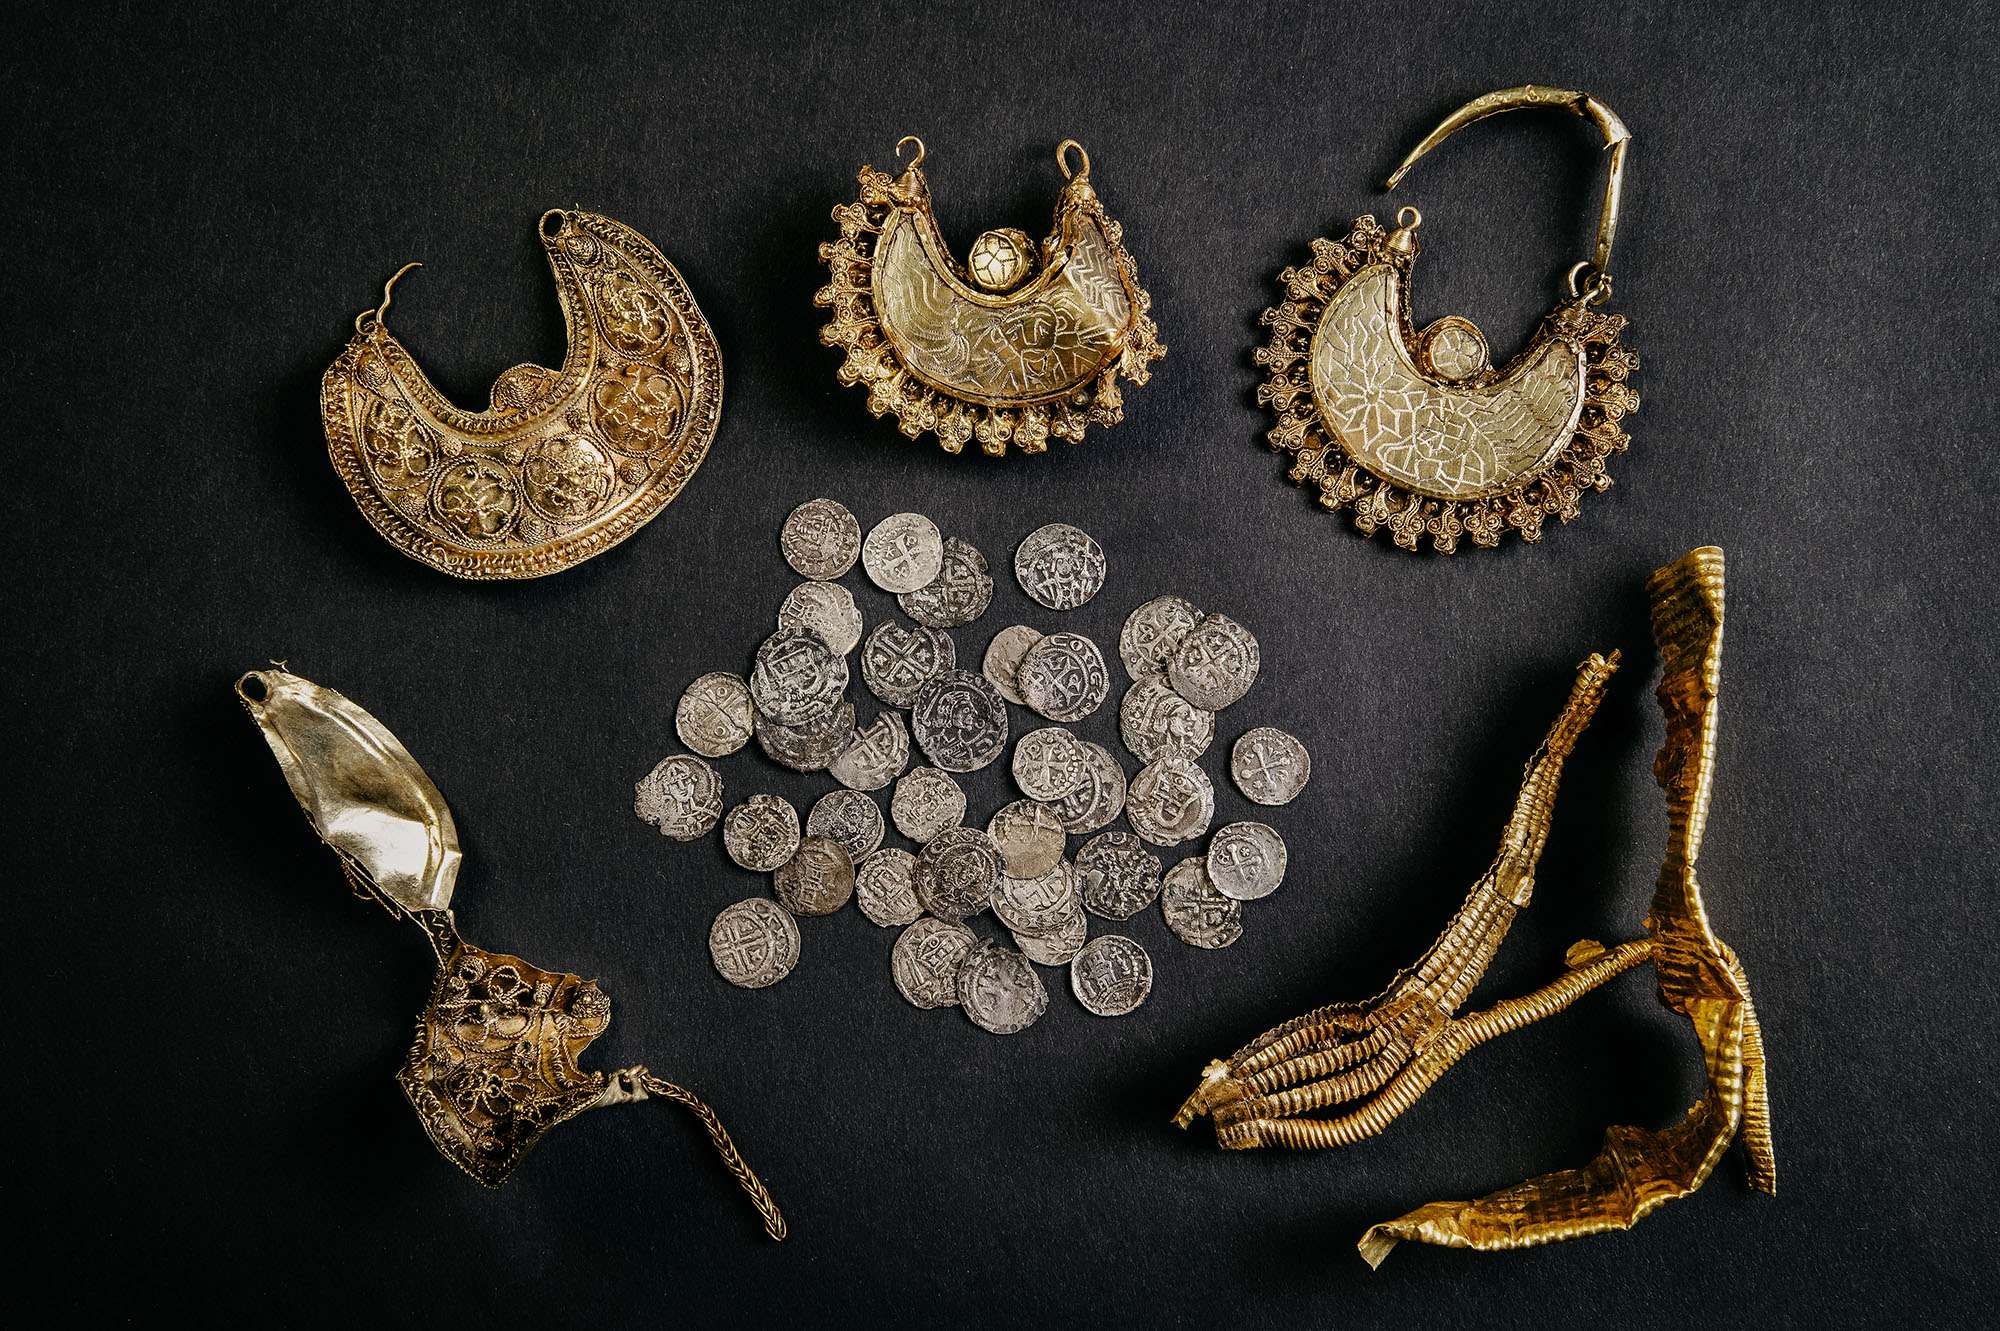 Read more about the article Historian Finds Unique 1,000-Year-Old Mediaeval Gold Treasure Using Metal Detector